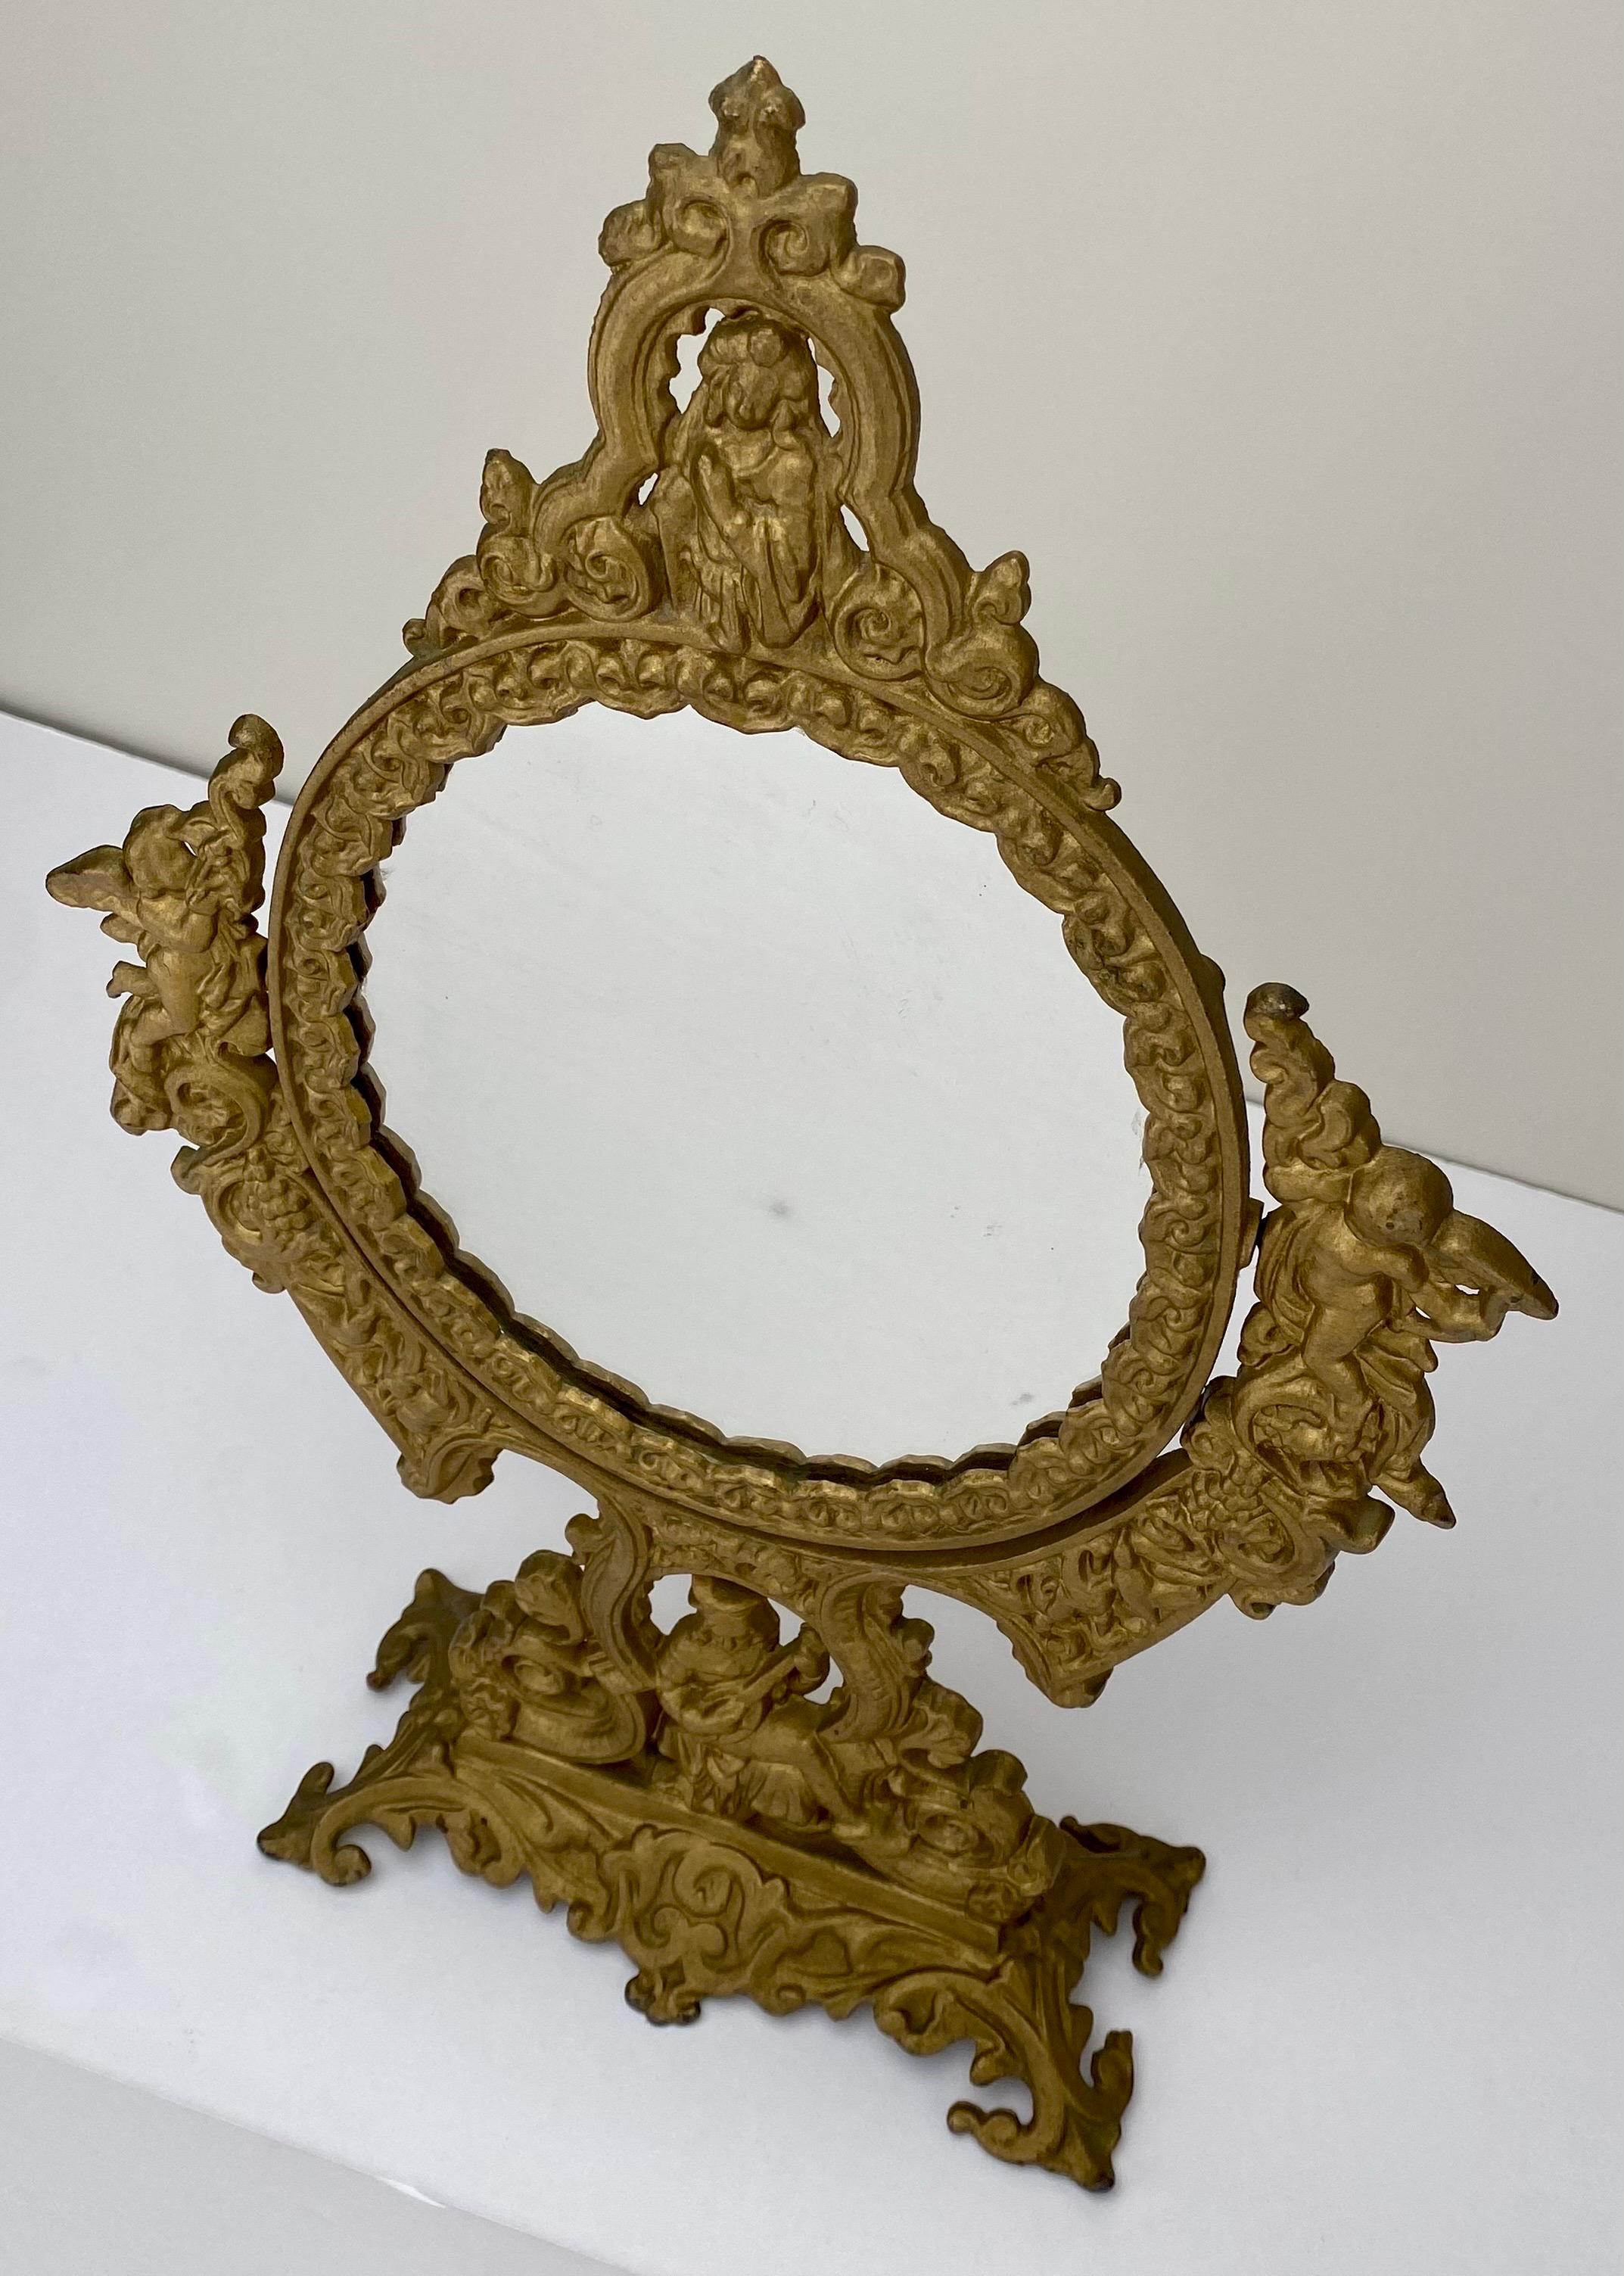 An exquisite antique French Victorian gilded bronze vanity mirror exuding a timeless charm from the late 19th Century. A multifaceted marvel, it features a swiveling oval mirror, gracefully adorned on each side by cherubic embellishments, while at